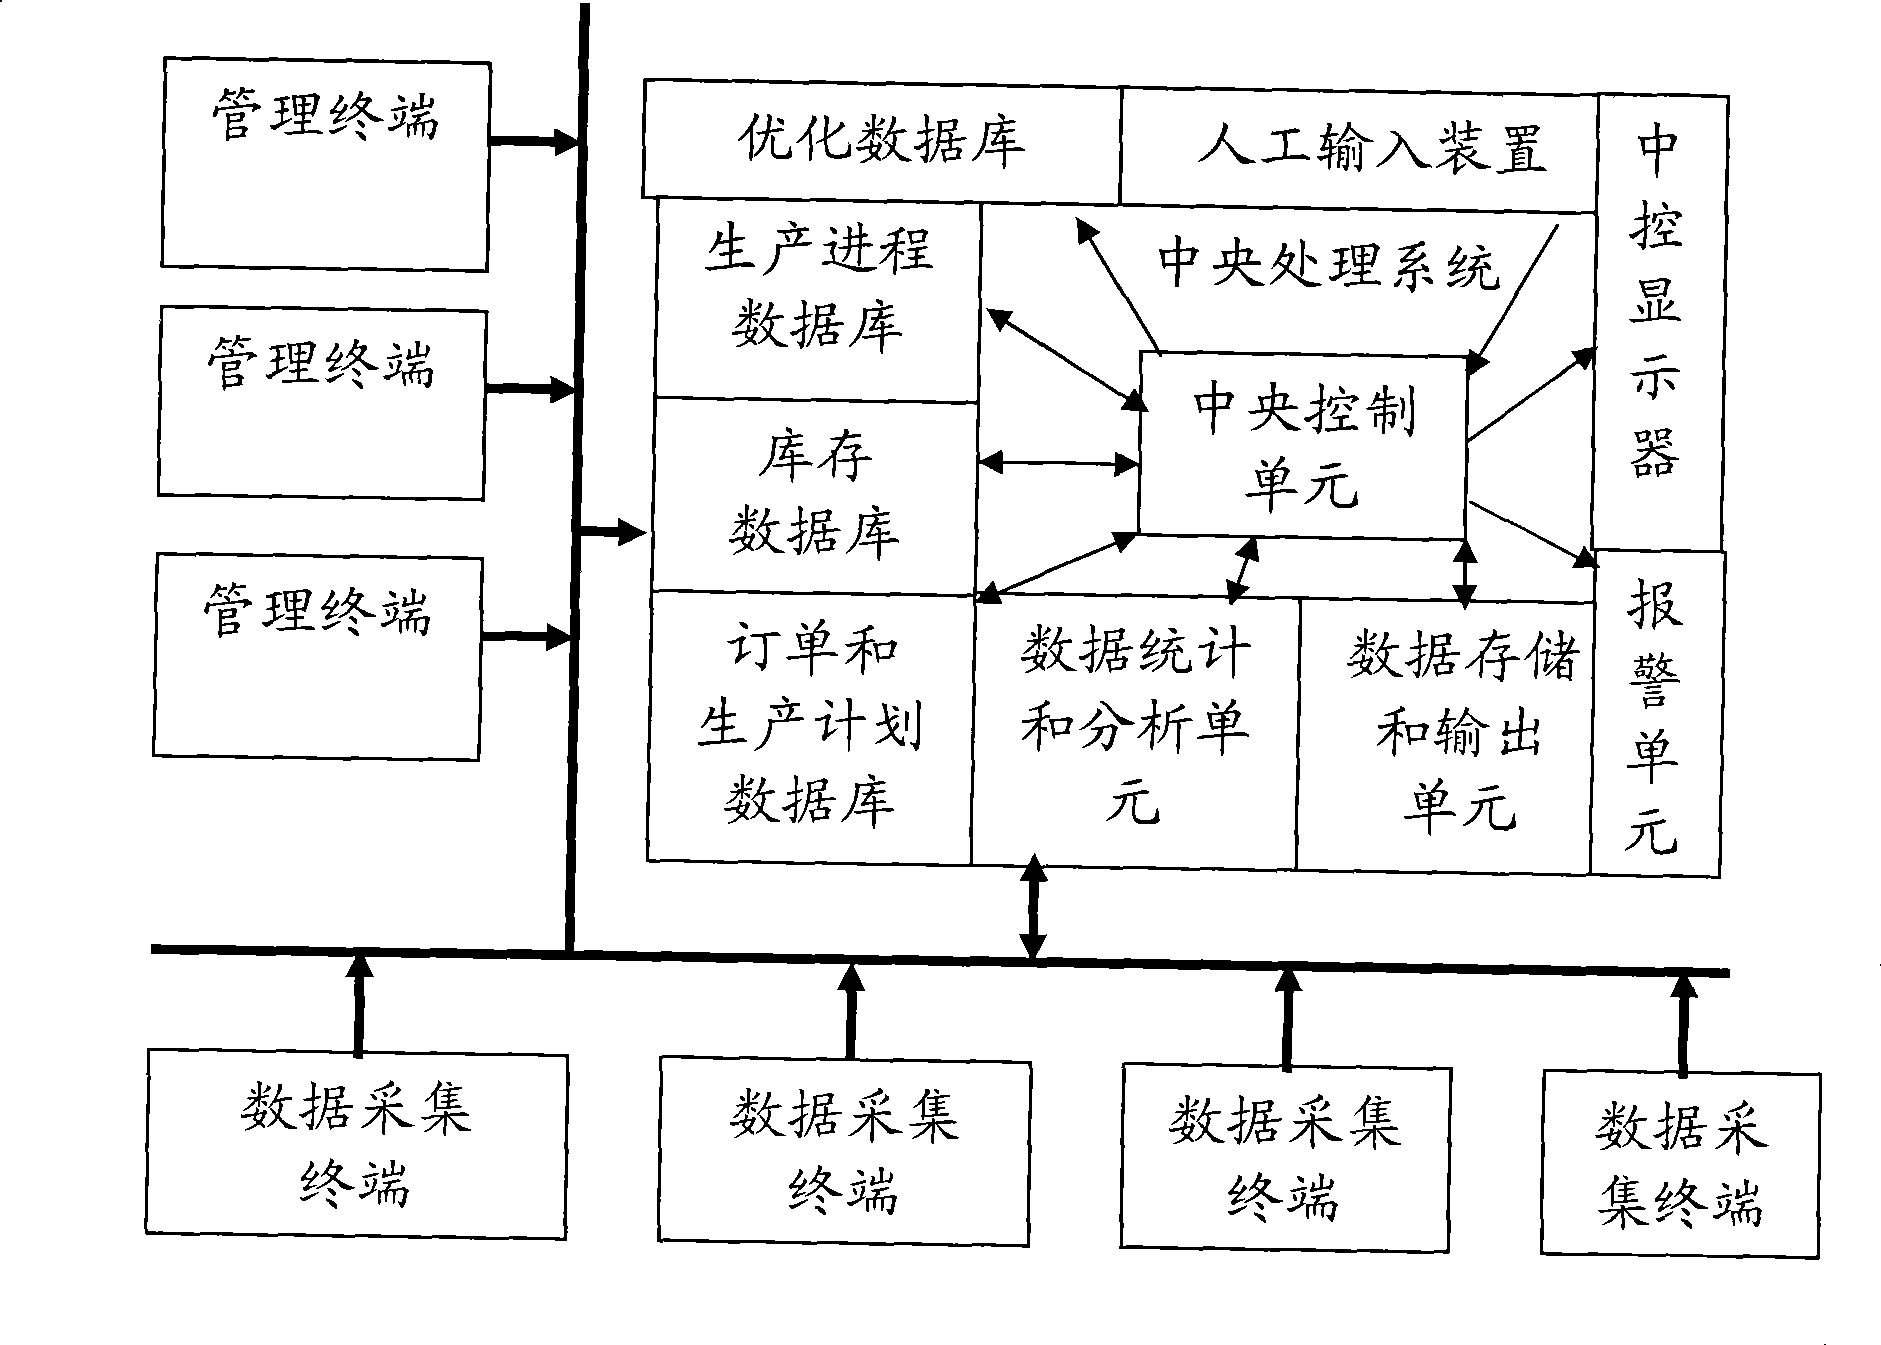 Computer optimized management and monitoring system for production enterprise